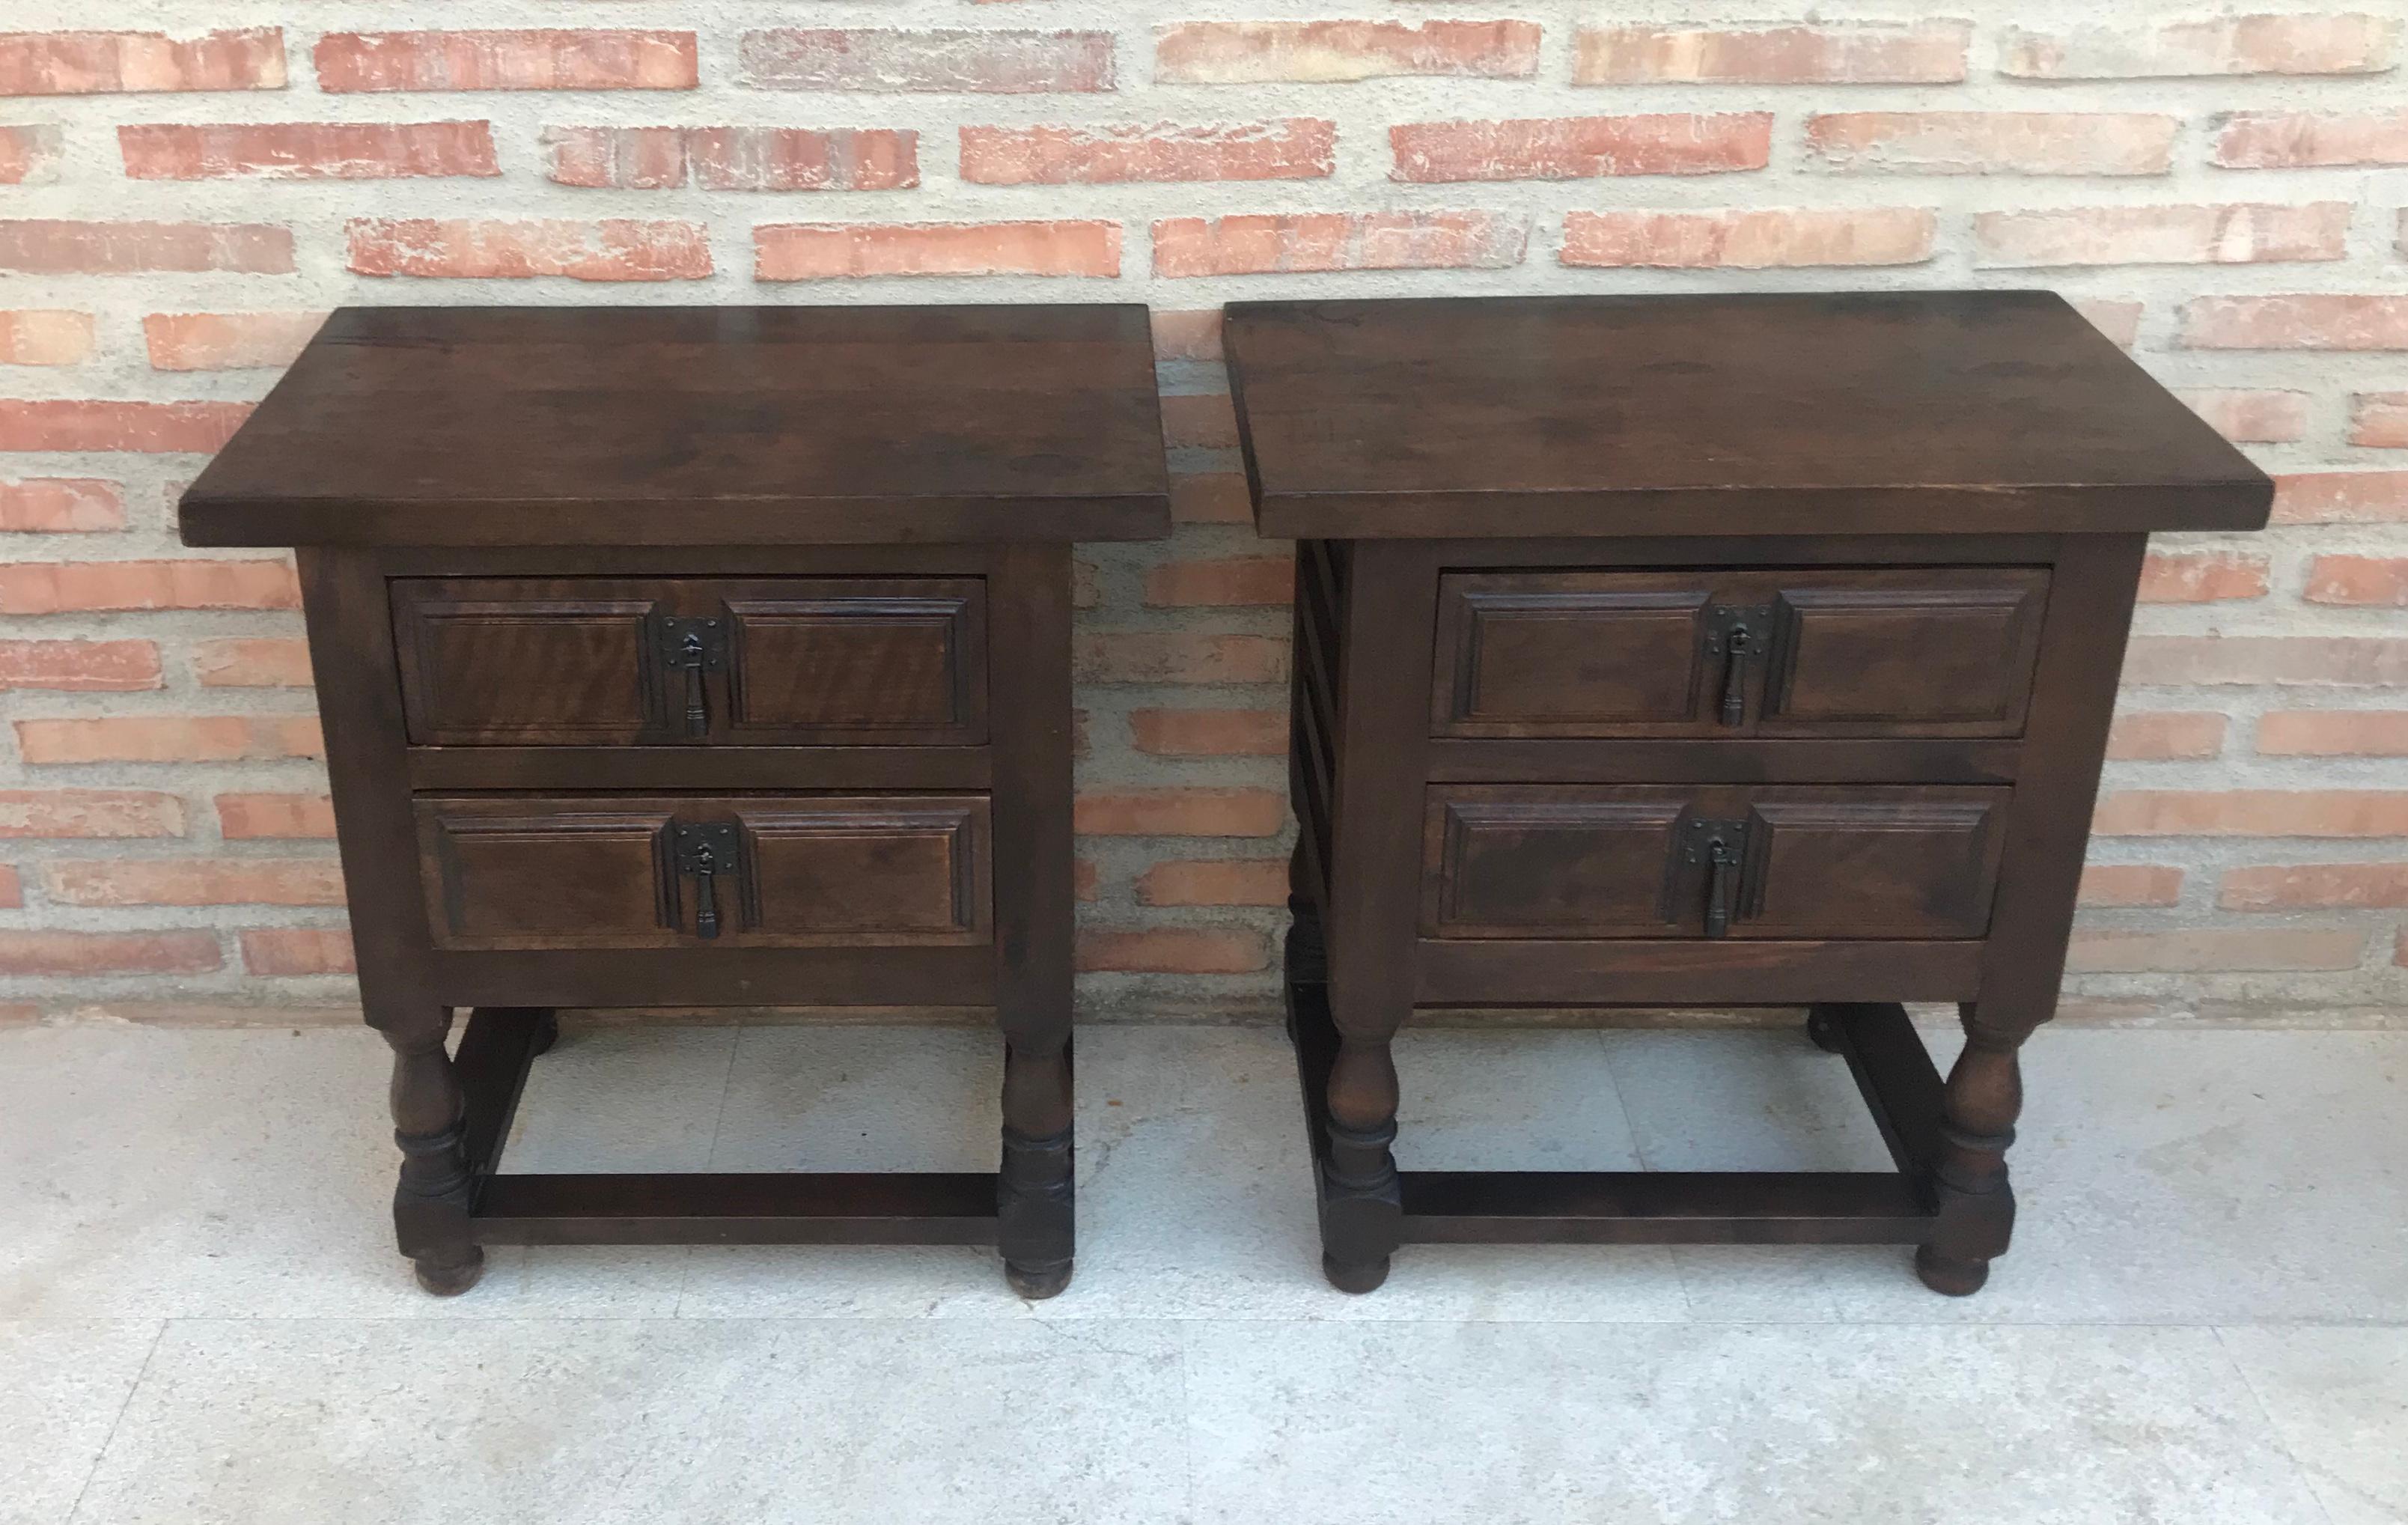 20th century pair of Spanish nightstands with two carved drawer and iron hardware.
Beautiful tables that you can use like a night stands or side tables, end tables... or table lamp.